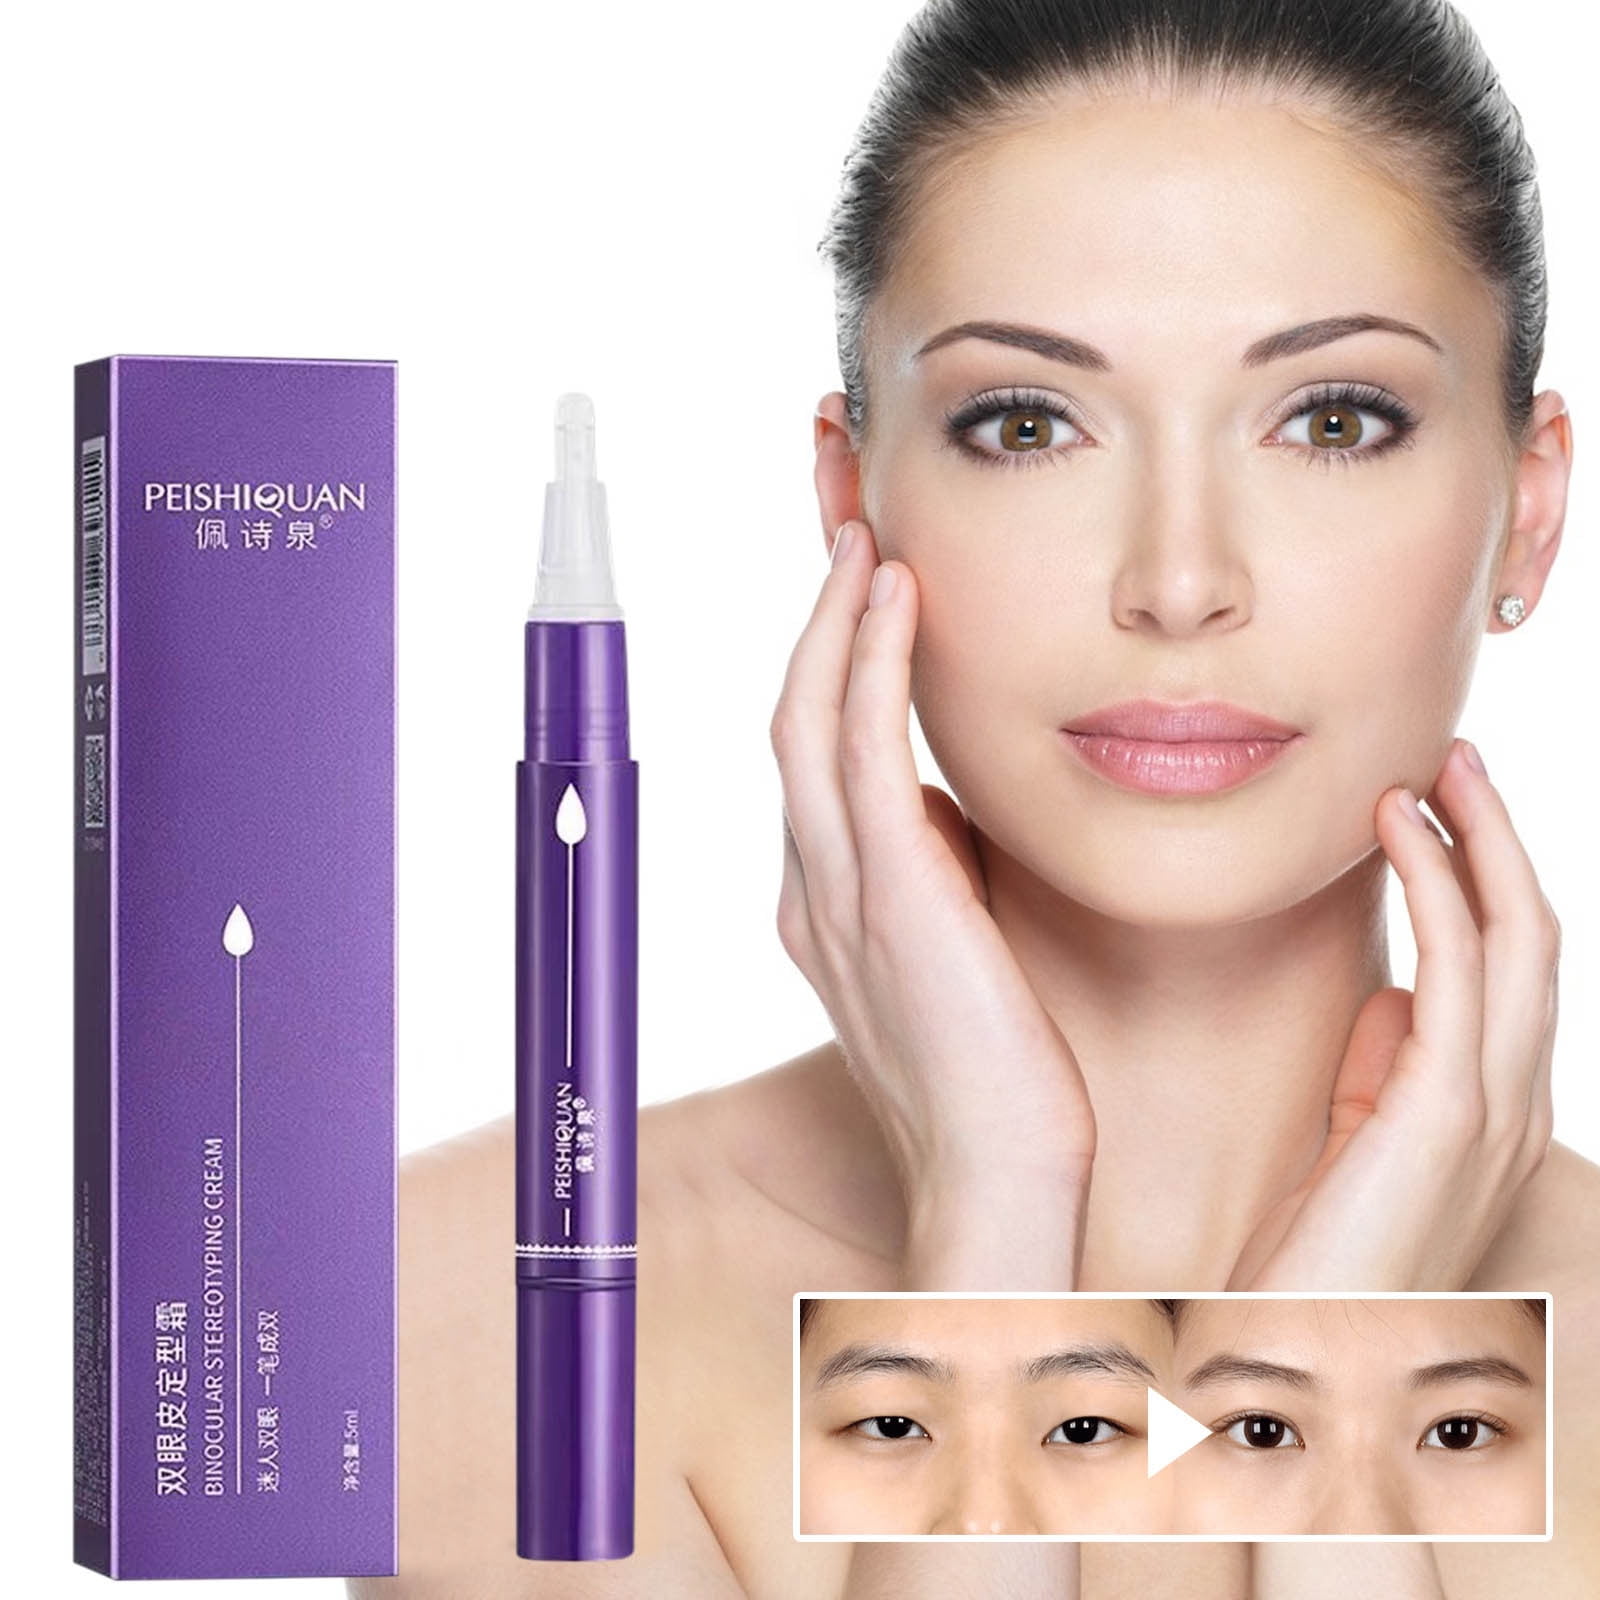 Kehuo Bigeyes Lifting Eyelid Defining Cream Applied In Pairs And Natural Paste Eyelid Lift Cream 1471